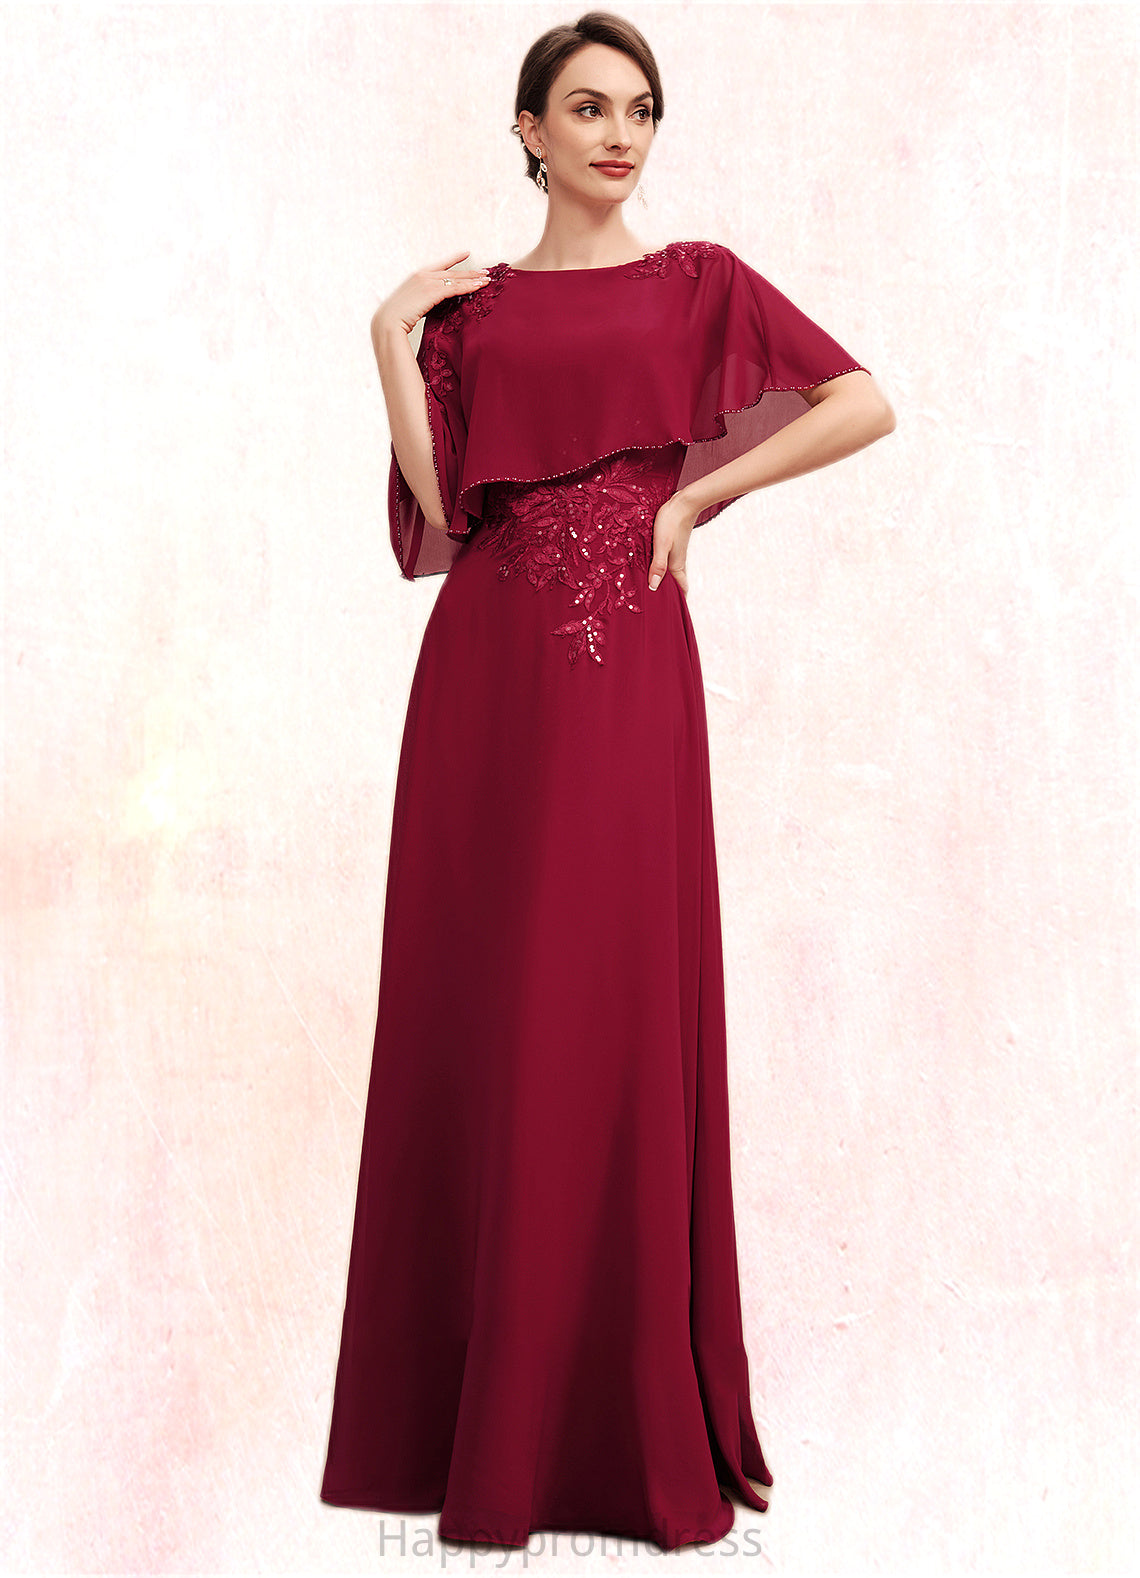 Zoe A-Line Scoop Neck Floor-Length Chiffon Mother of the Bride Dress With Lace Beading Sequins XXS126P0014583